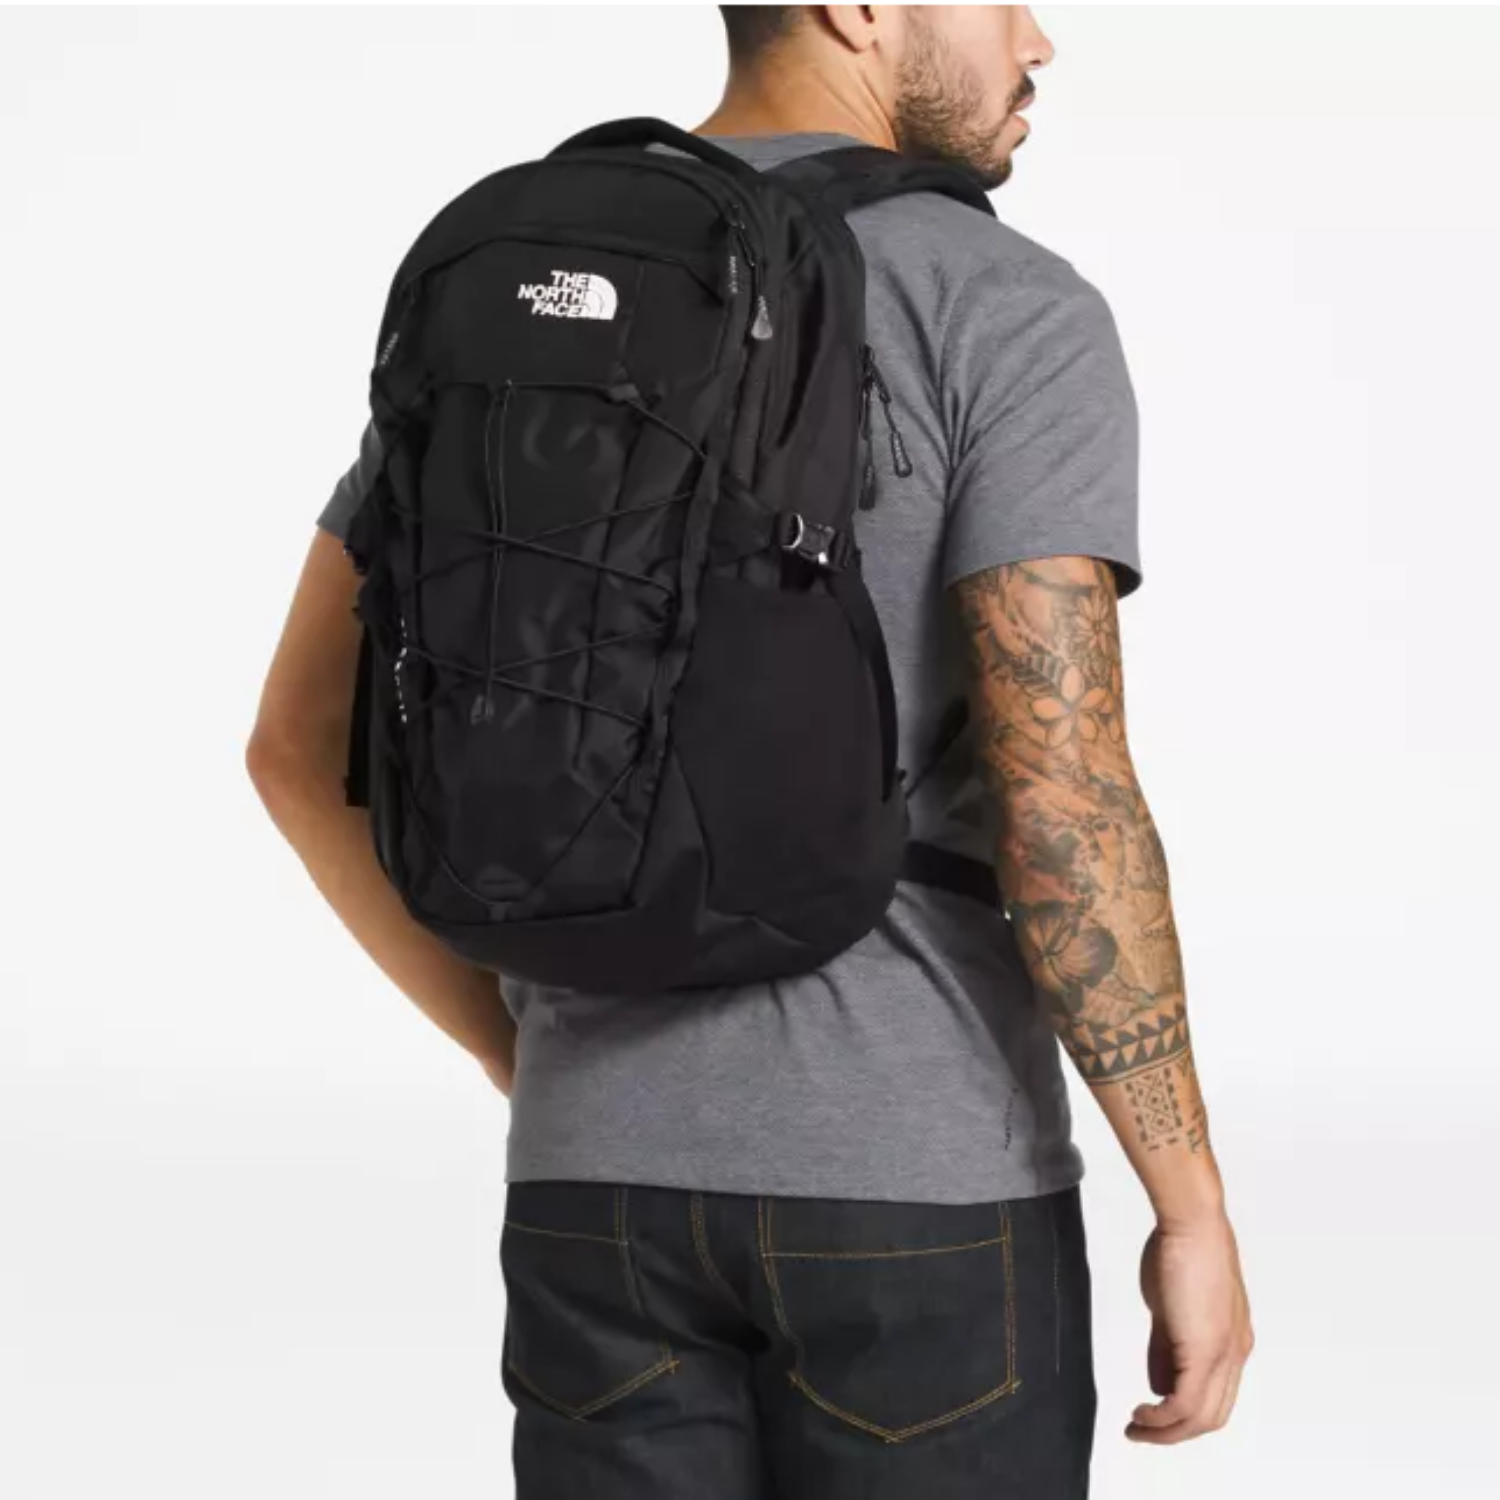 the north face borealis backpack black 